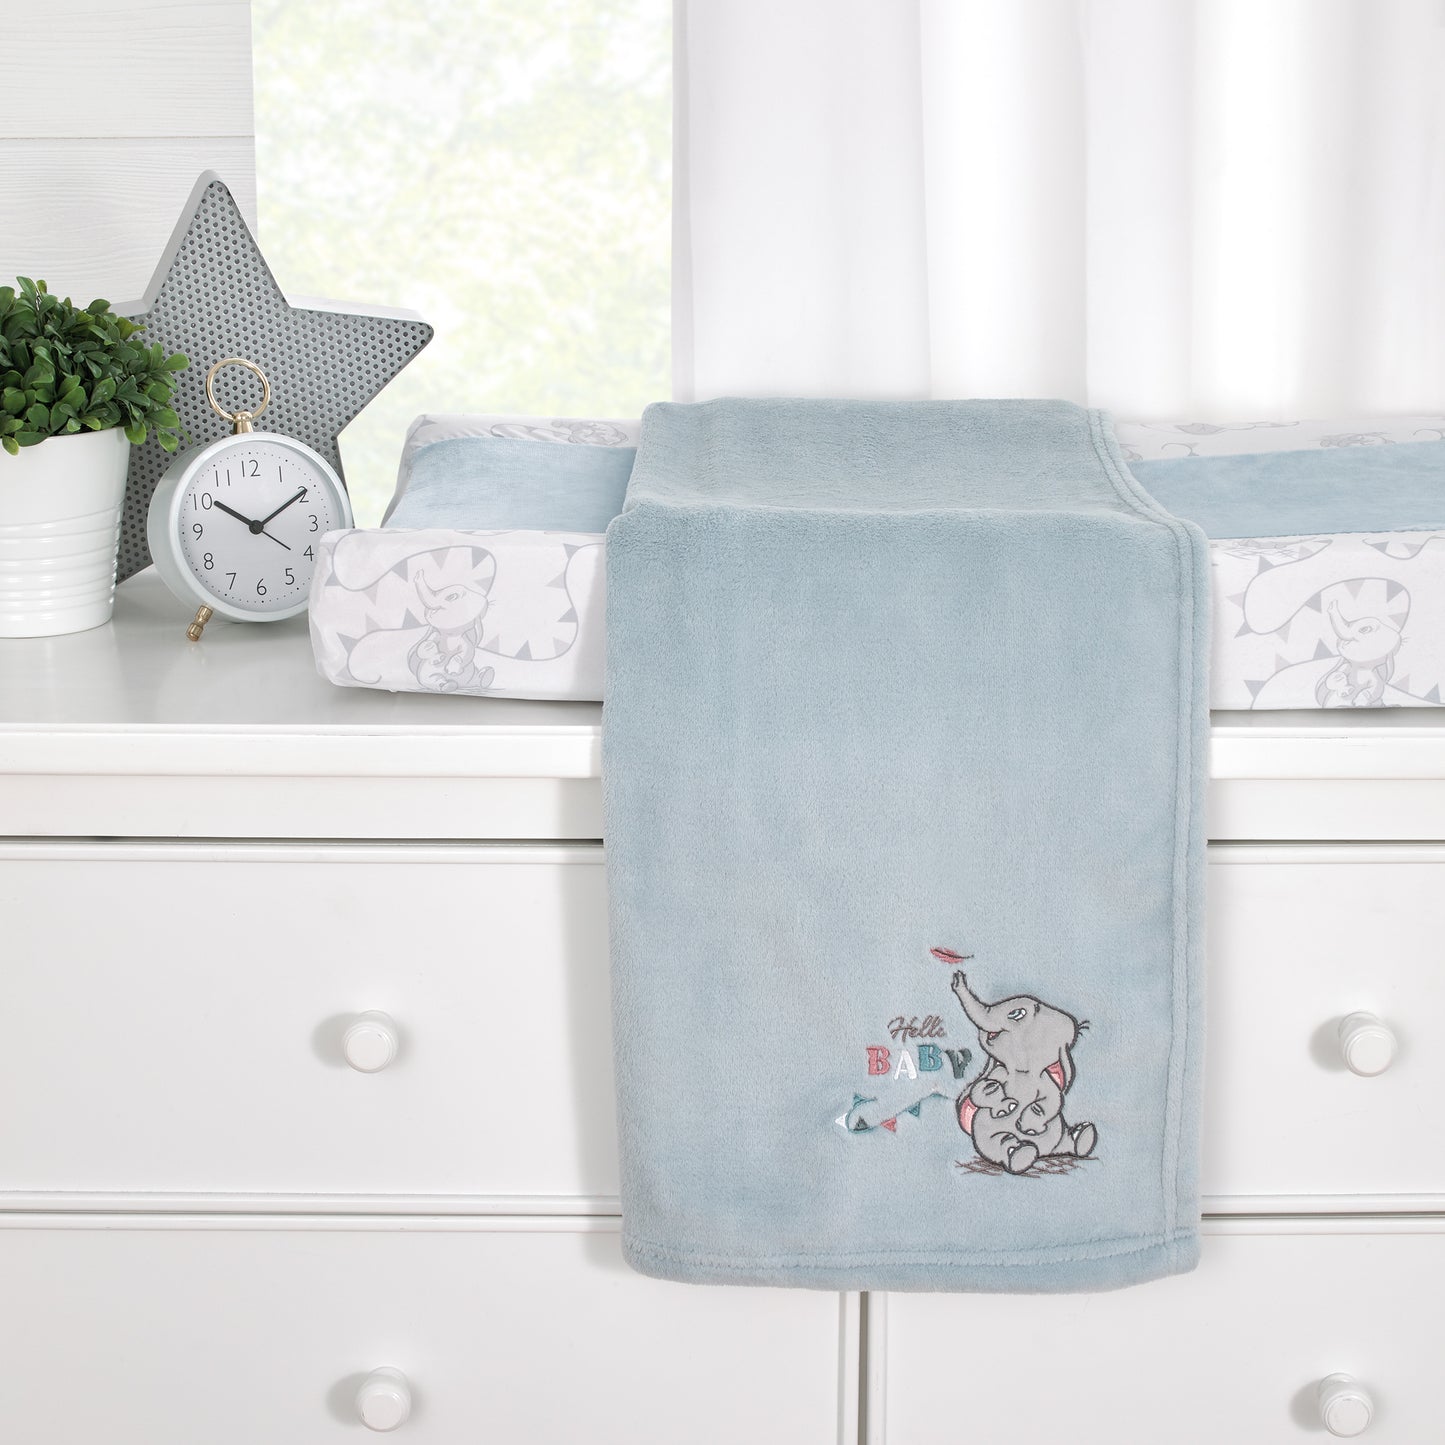 Disney Dumbo Hello Baby Blue and Grey Super Soft Appliqued Baby Blanket